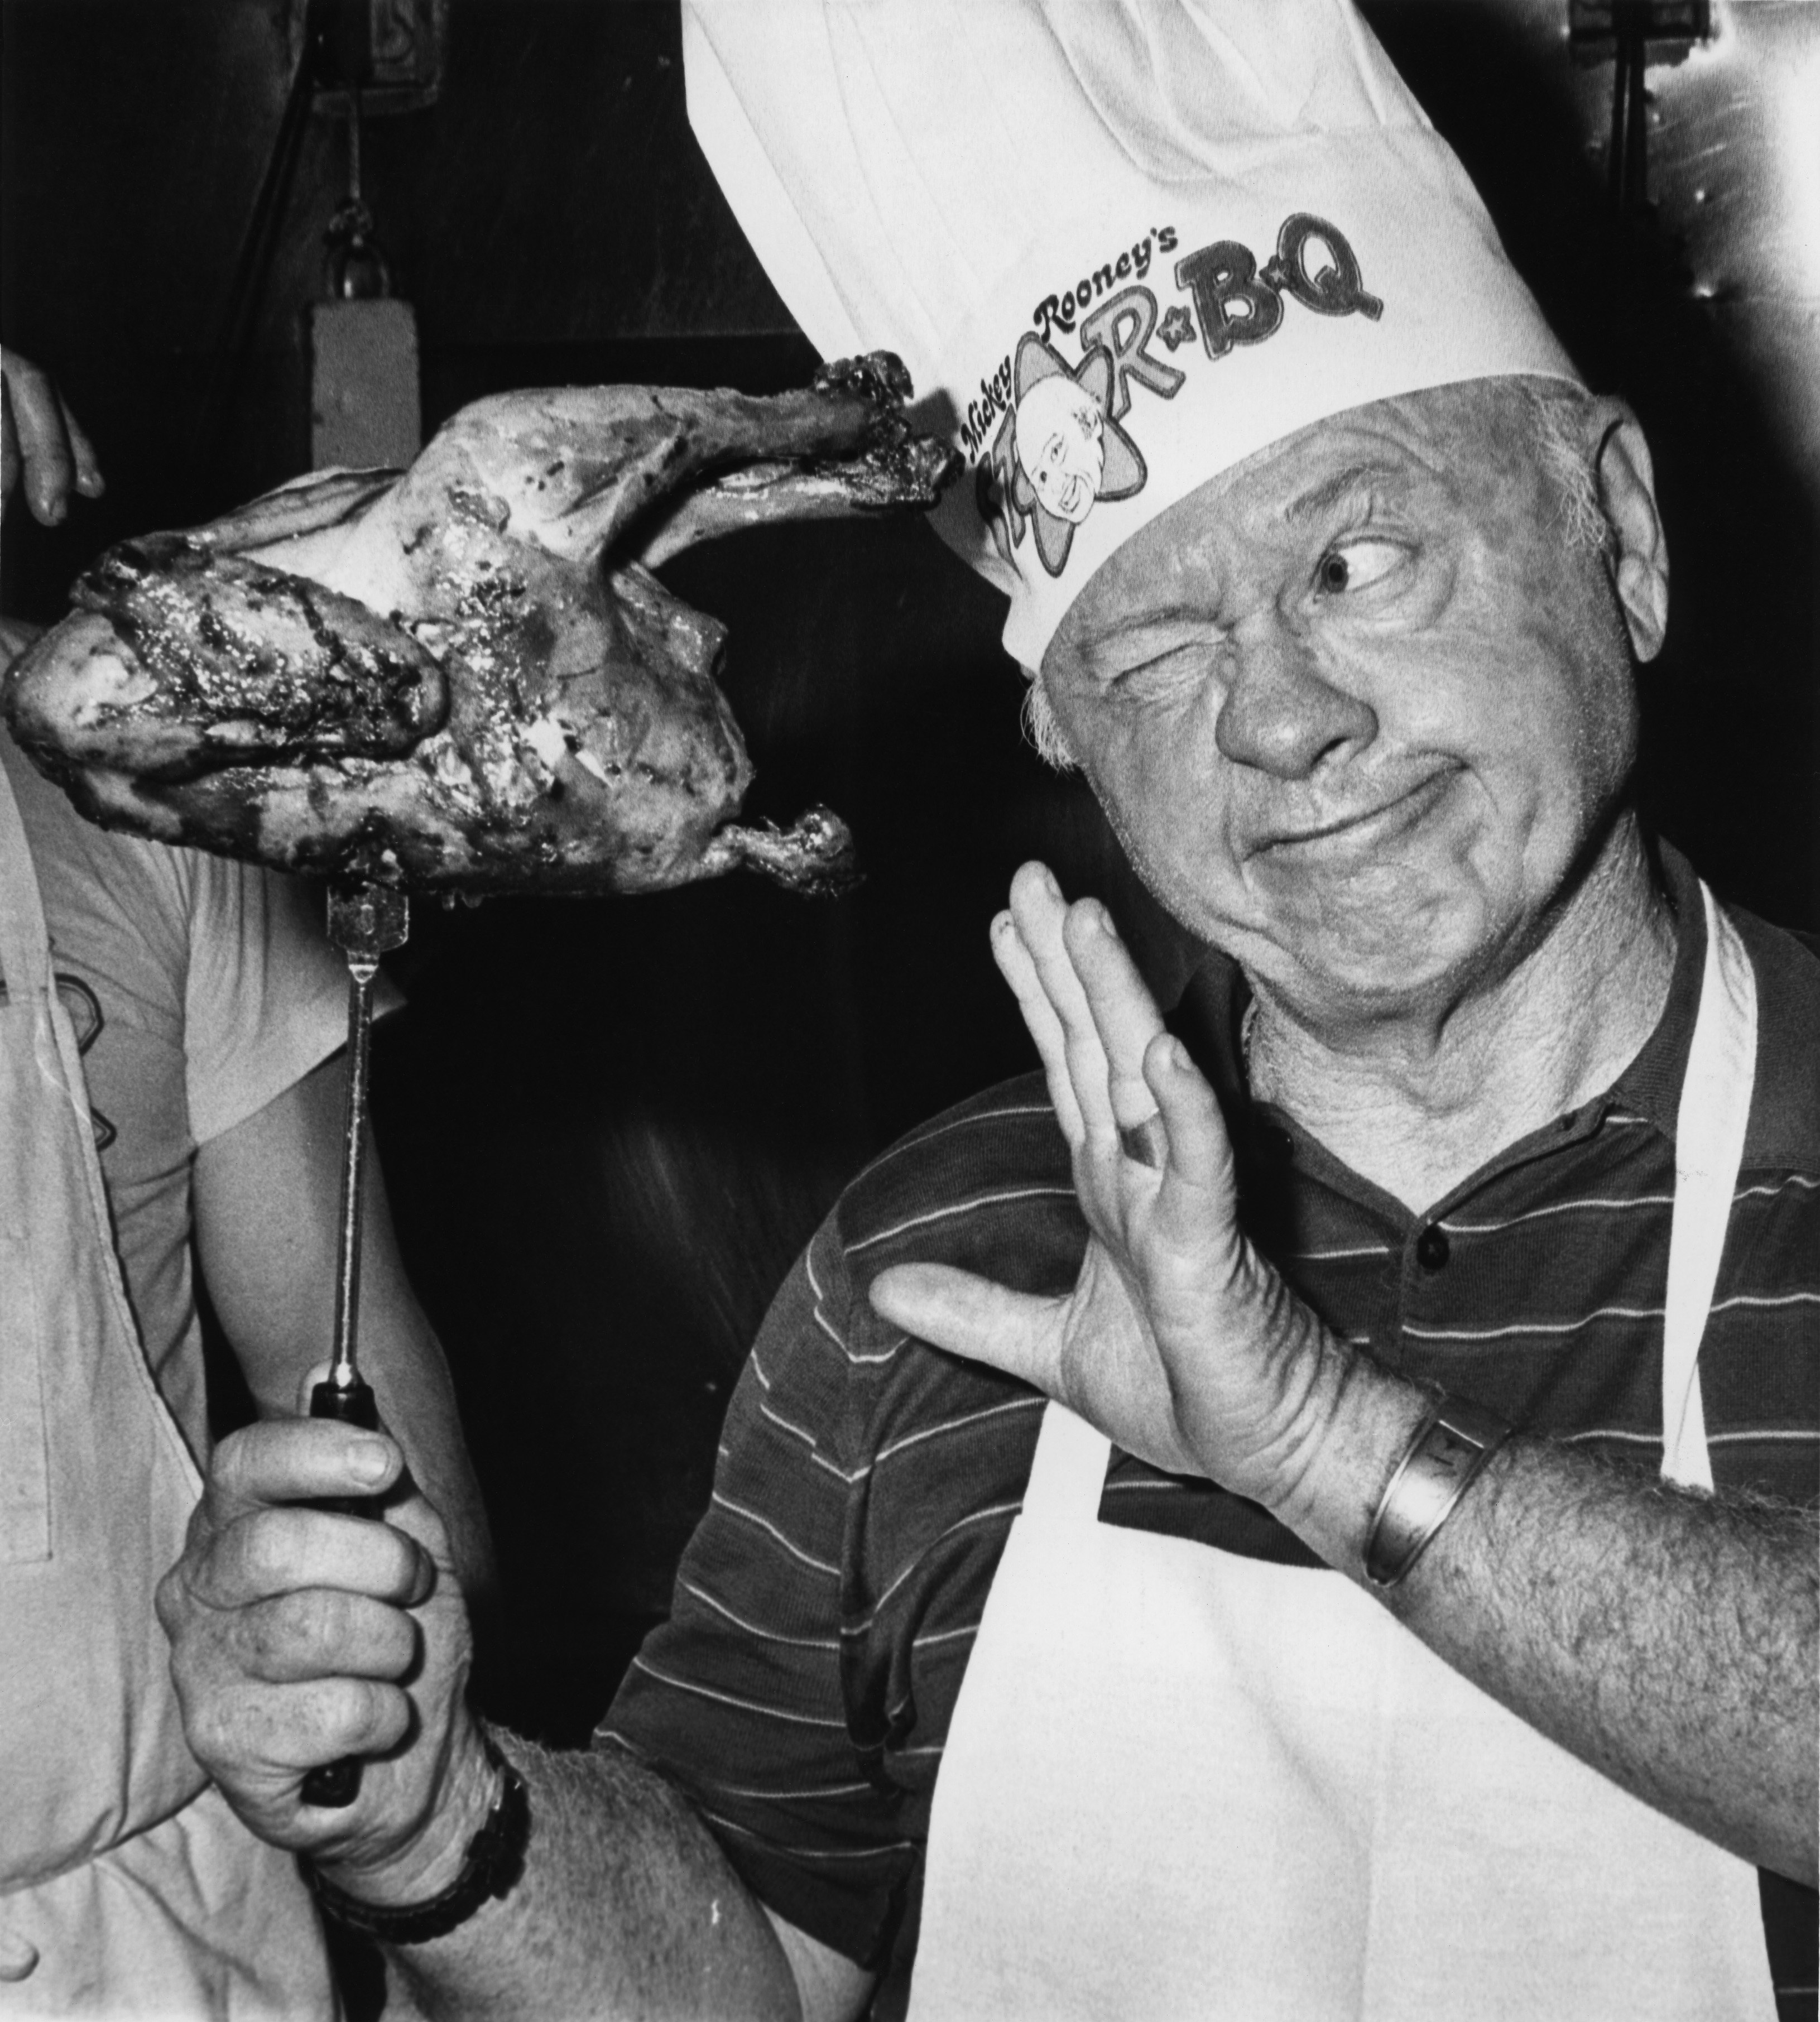 Rooney sizes up a barbecued chicken during festivities at the opening of his 'Mickey Rooney's Star-B-Q' restaurant in Hollywood on April 13 1980 in Los Angeles, California.